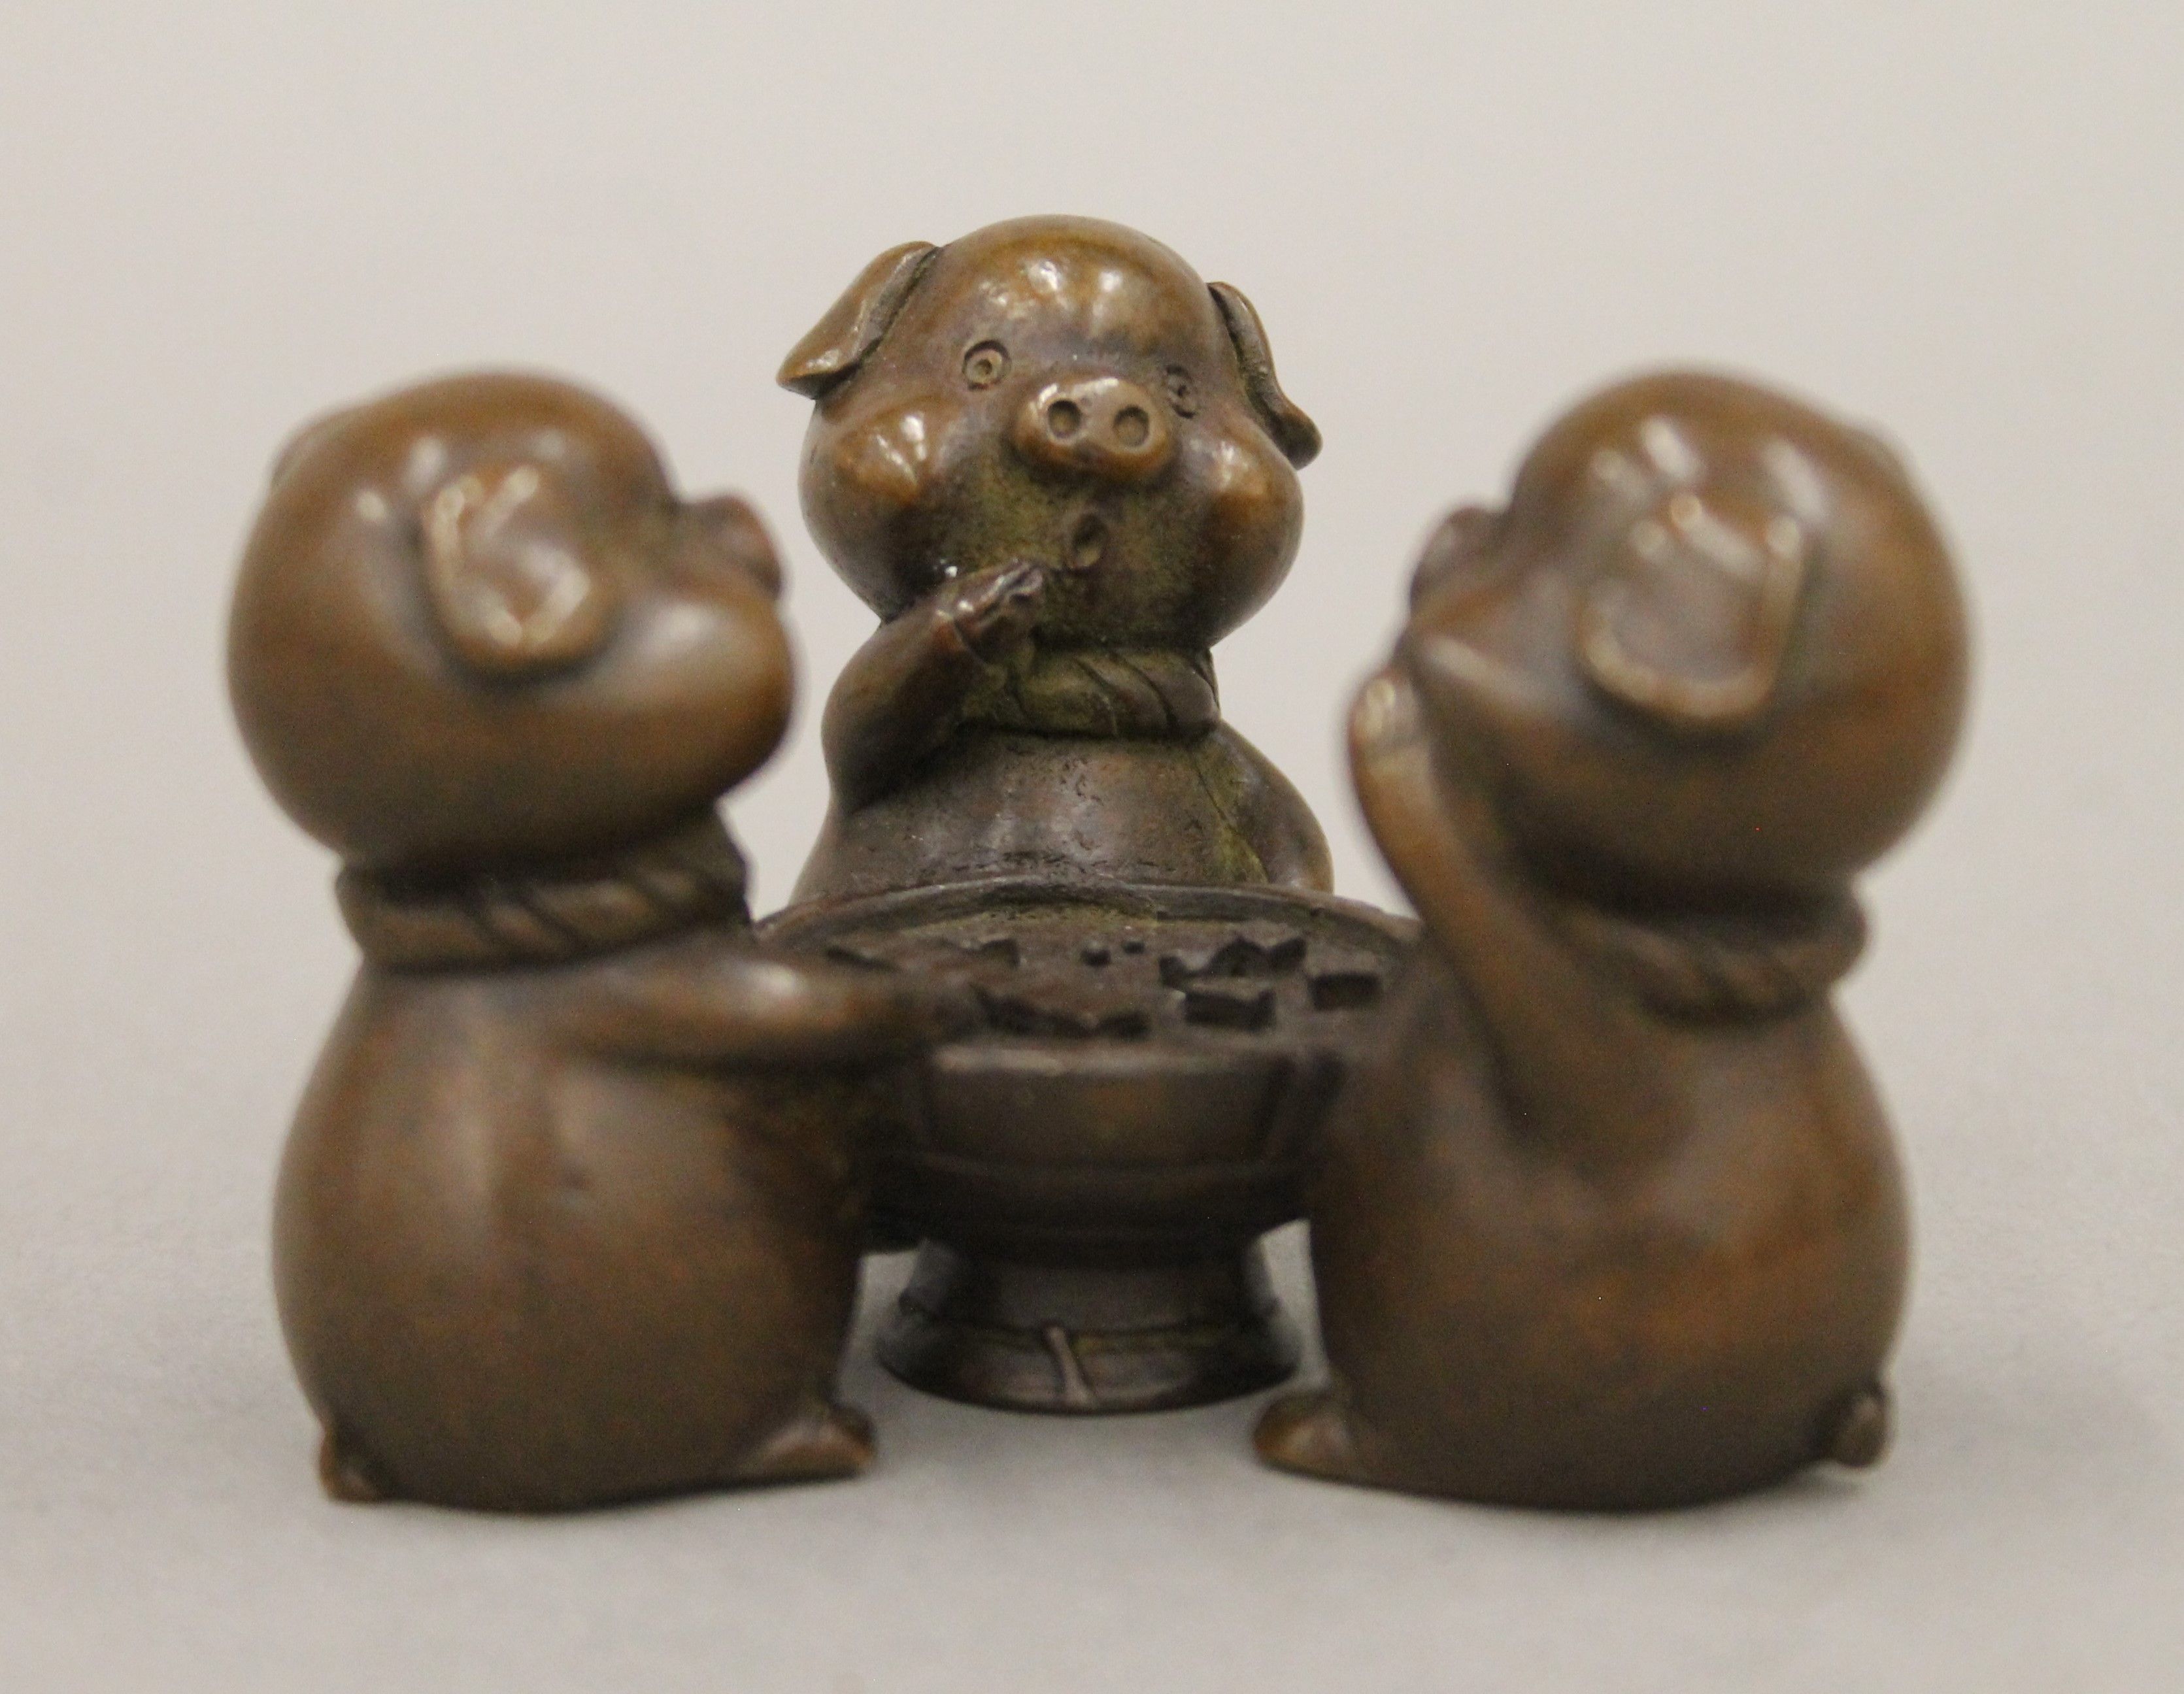 A bronze model of three pigs playing a game. 4.5 cm high.